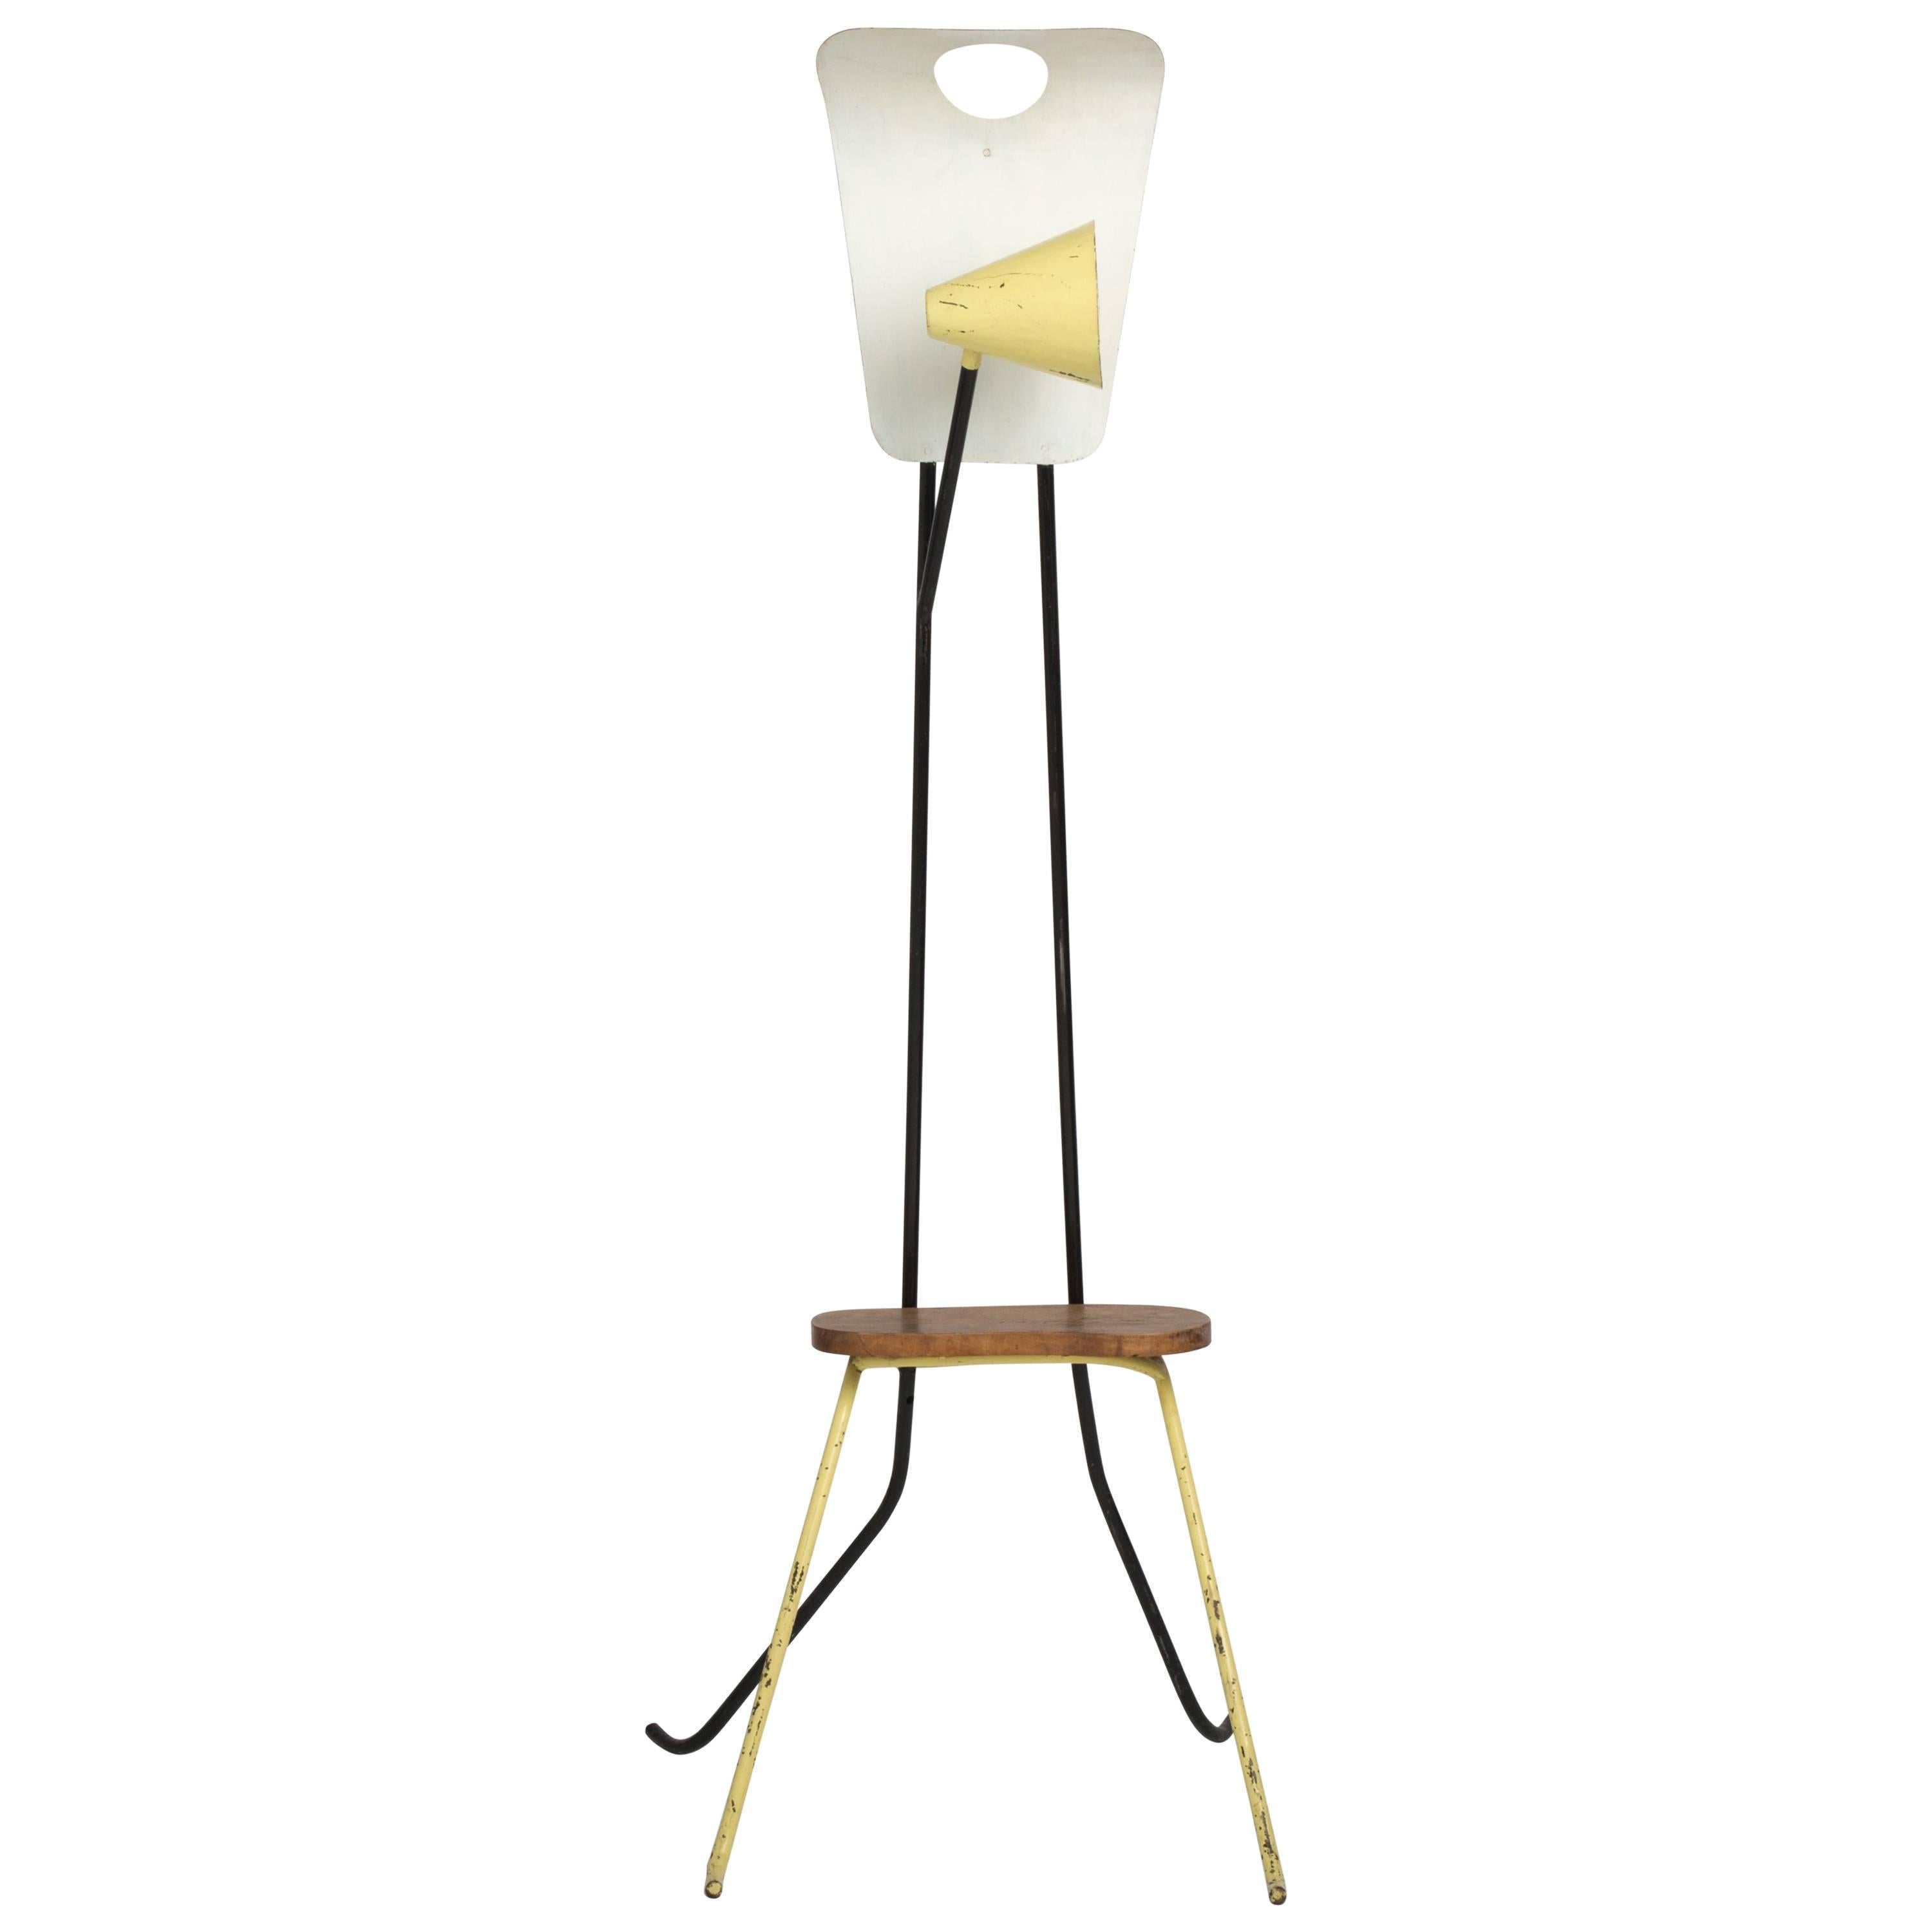 Mategot Style Sculptural Floor Lamp with Small Bench, France 1960s